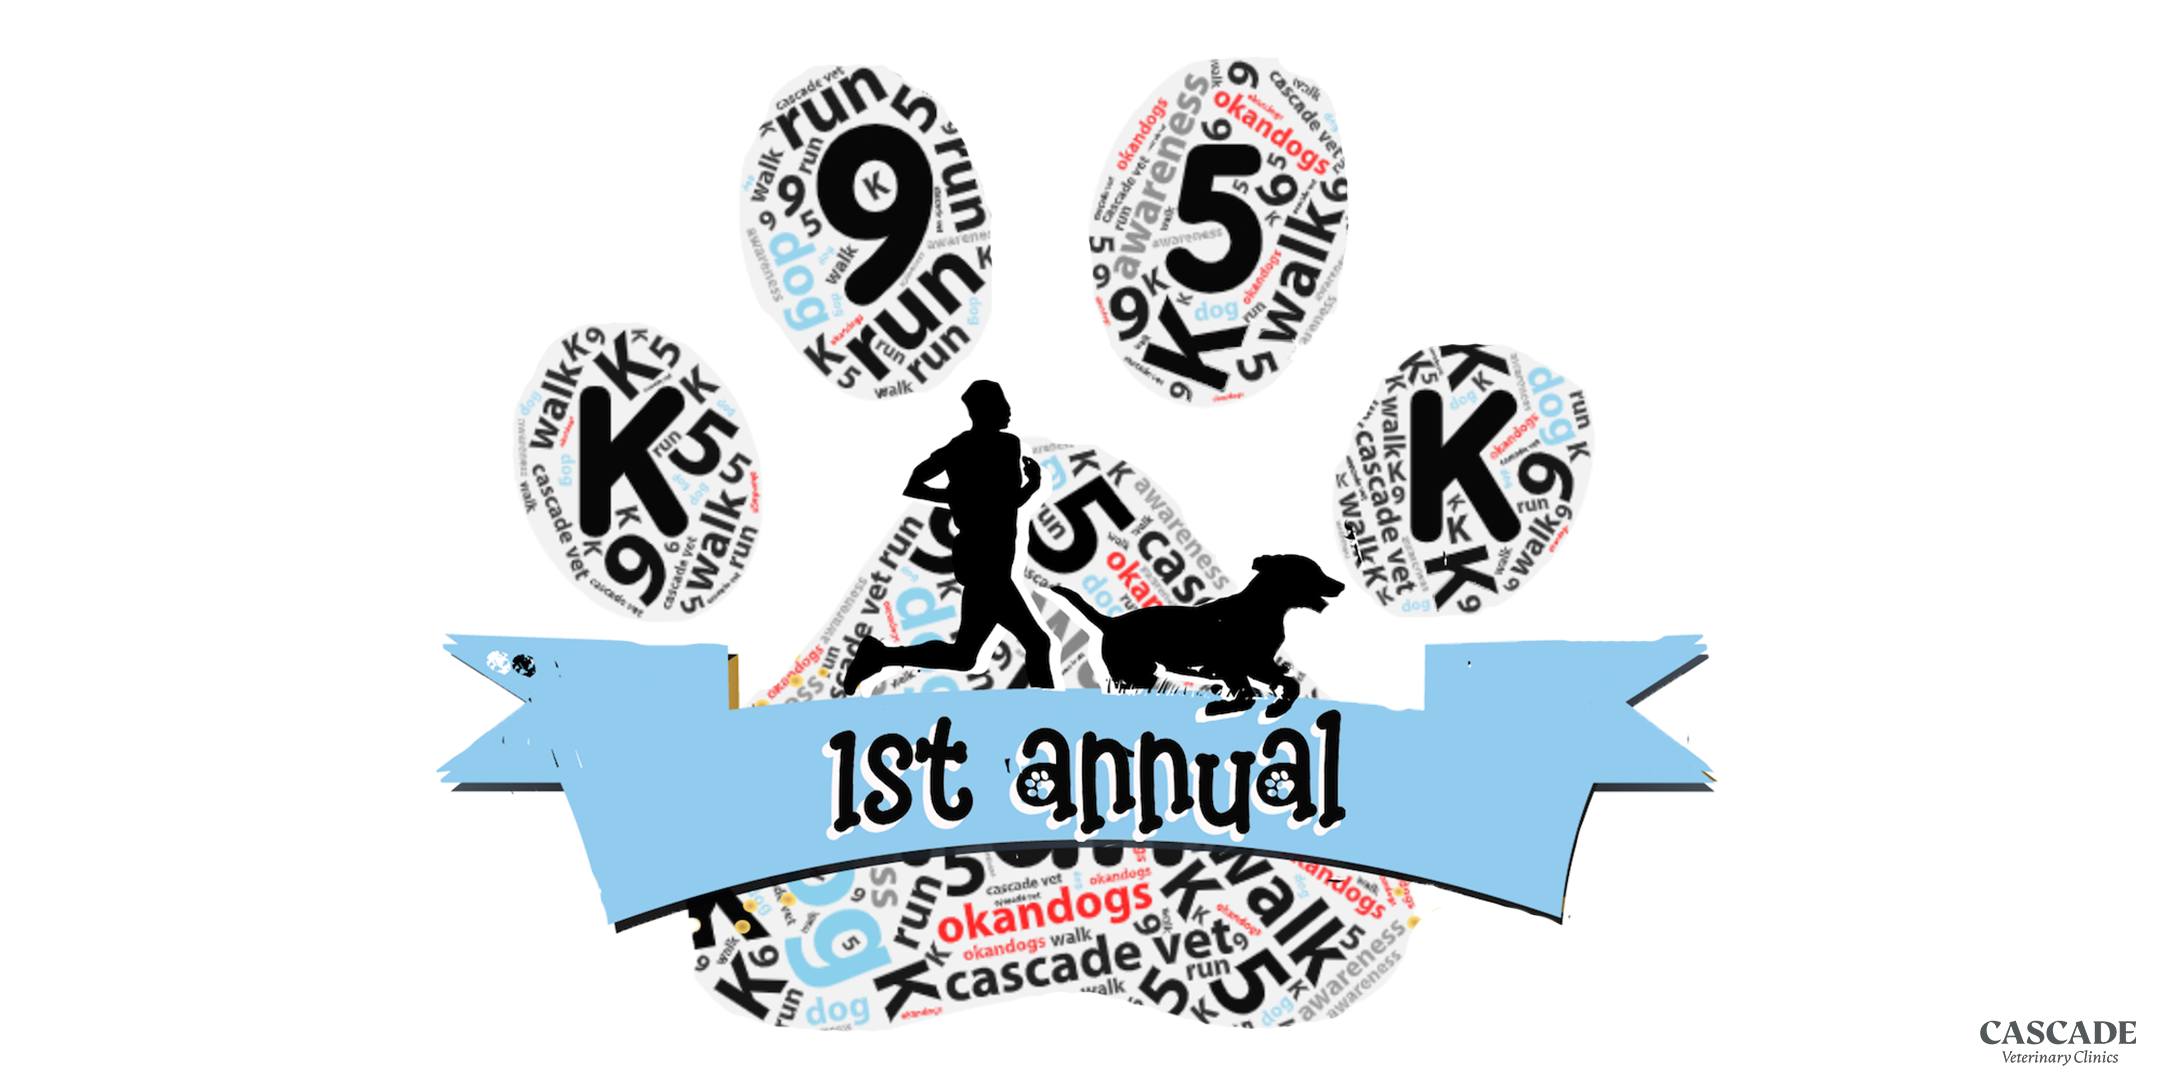 <h1 class="tribe-events-single-event-title">K9-5K Run/Walk for Charity</h1>